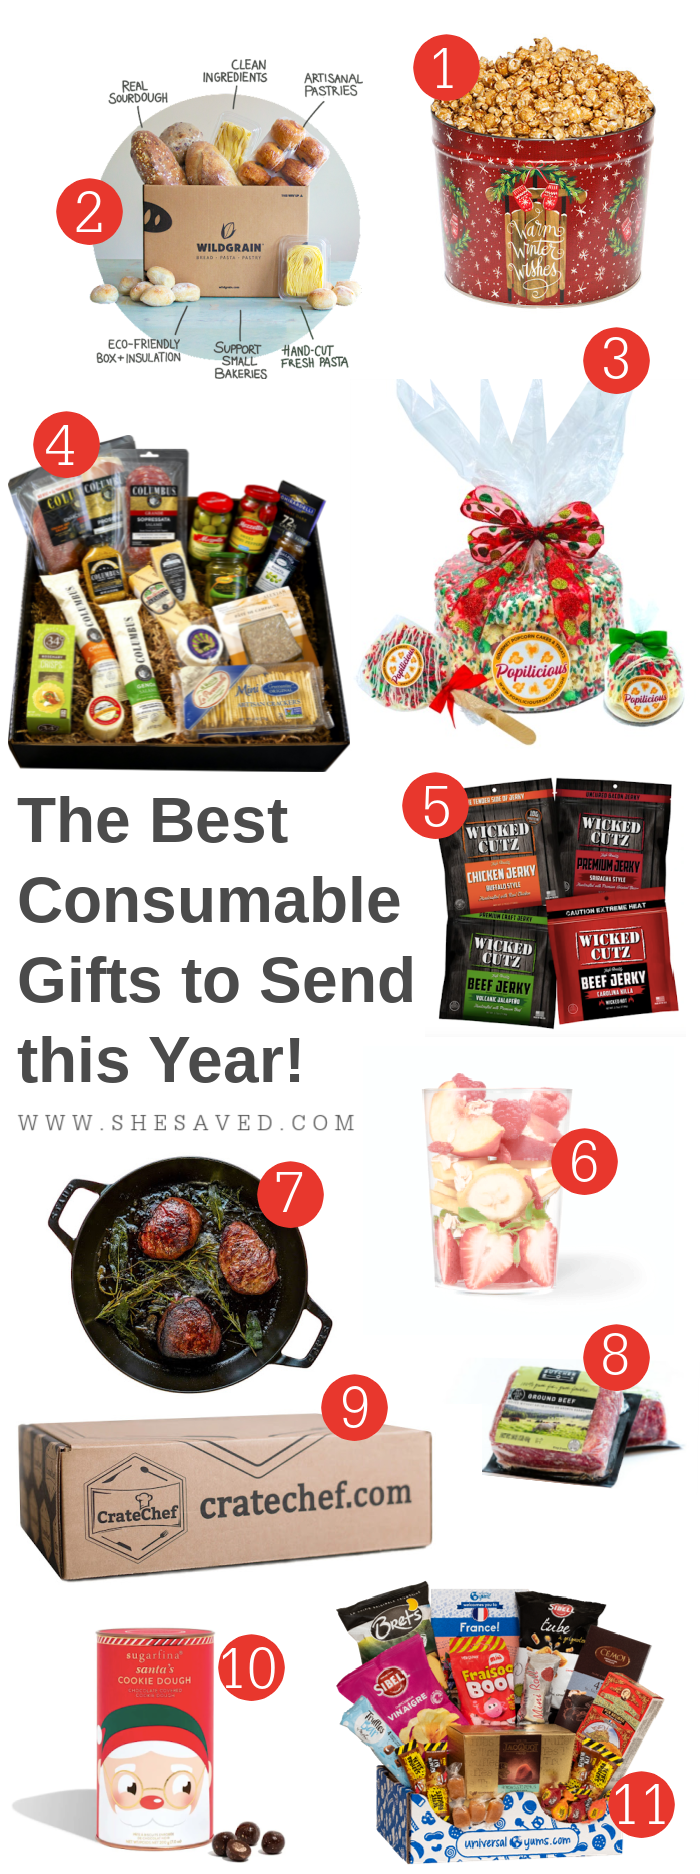 https://www.shesaved.com/wp-content/uploads/2021/12/Edible-Gift-Guide-Ideas.png